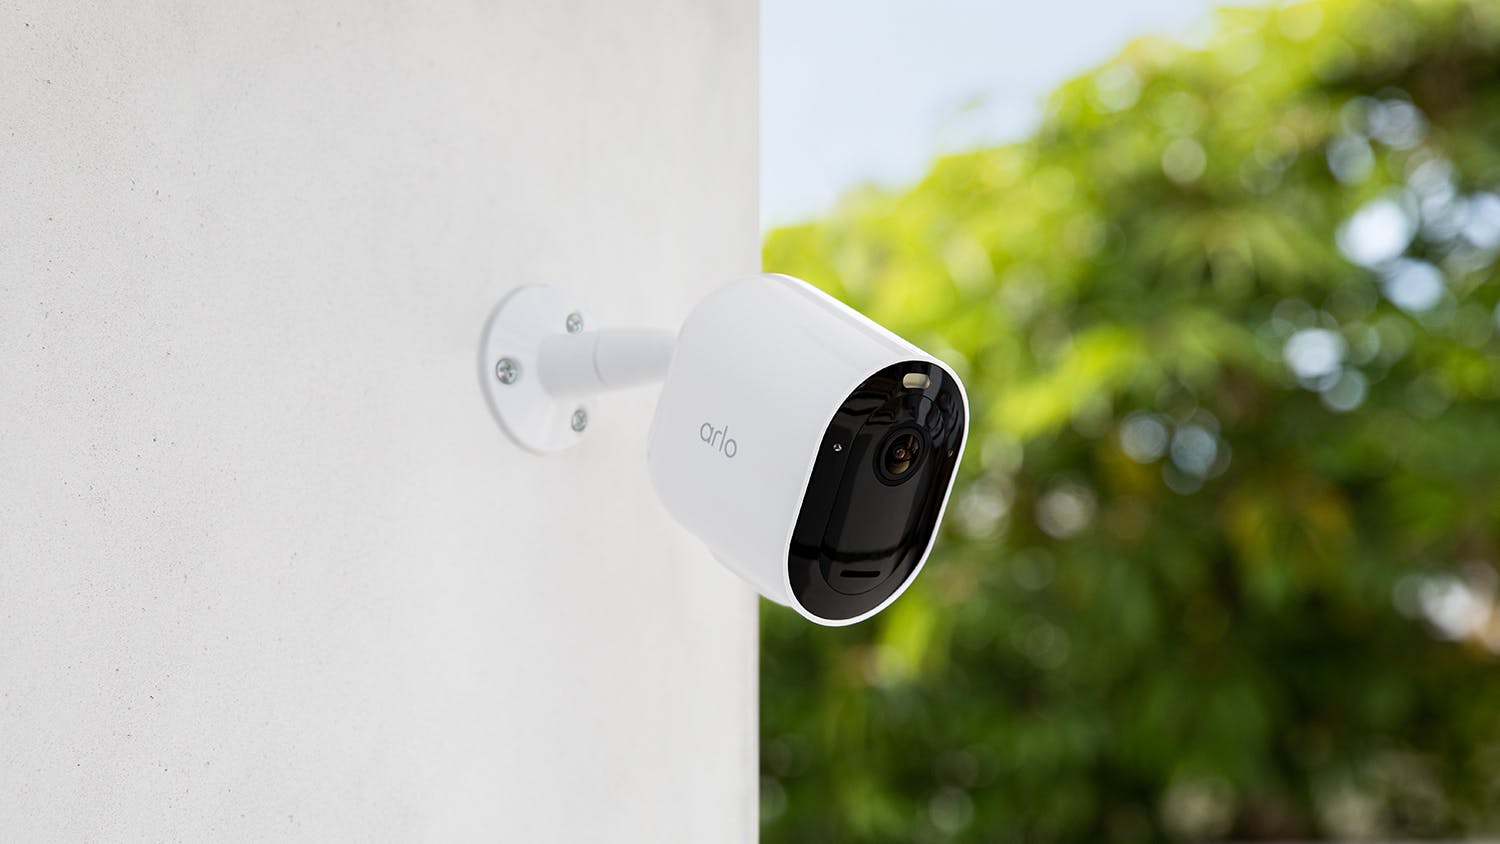 Arlo Pro 5 2K Indoor/Outdoor Wire-Free Security Camera with Spotlight - 1 Pack